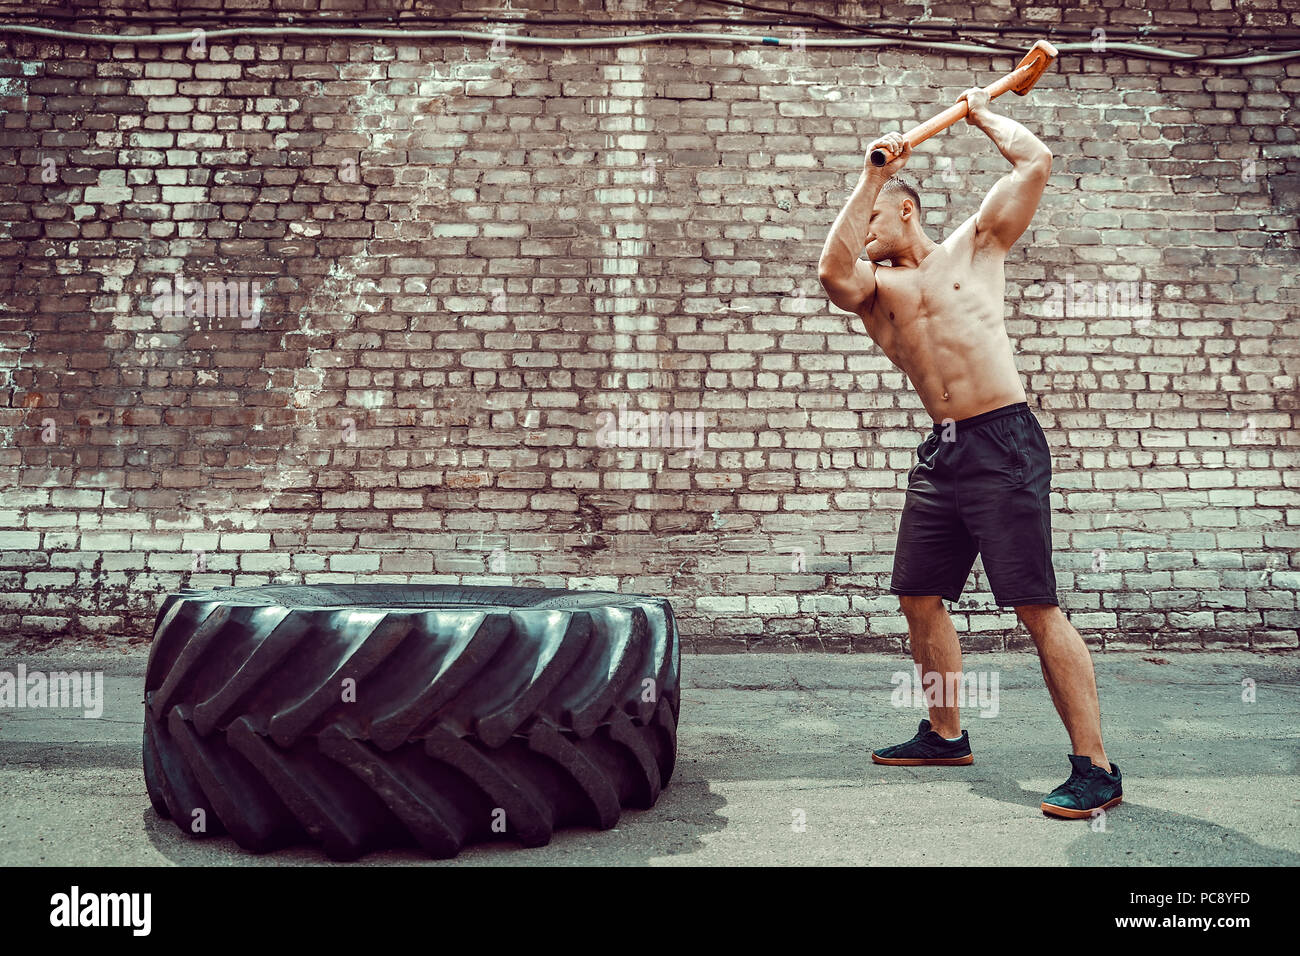 Sport Fitness Man Hitting Wheel Tire With Hammer Sledge Crossfit Training,  Young Healthy Guy Gym Interior OUTSIDE Stock Photo - Alamy